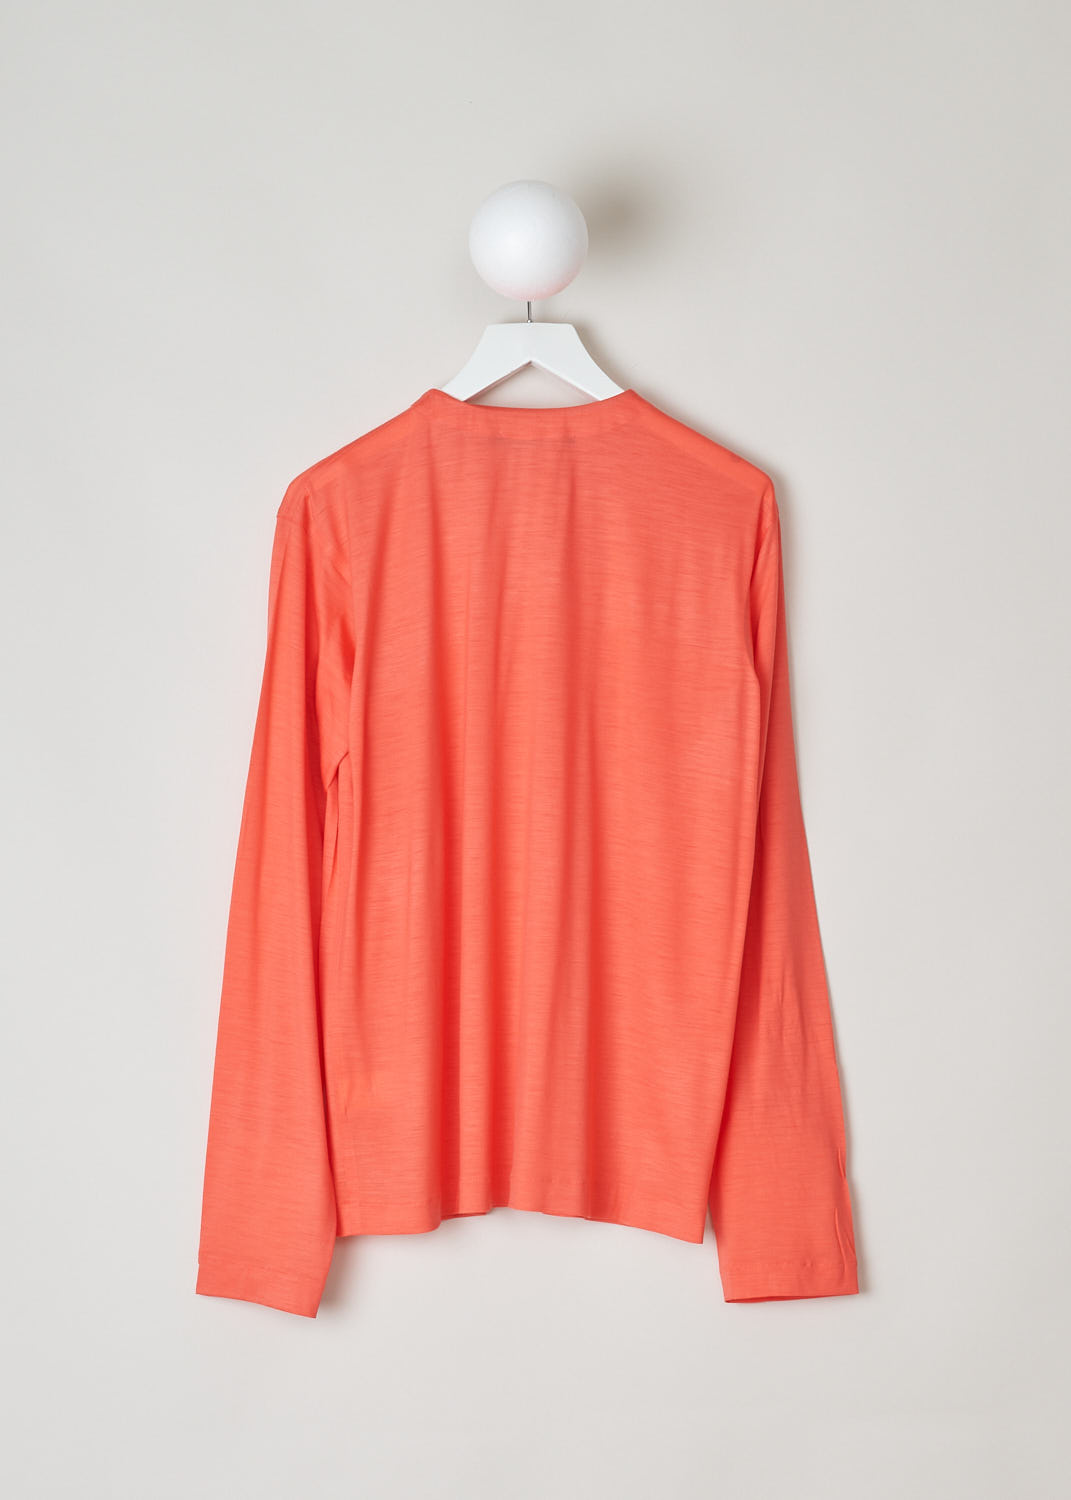 SOFIE Dâ€™HOORE, LONG SLEEVE CORAL TOP, BRIANNA_WOJE_CORAL, Pink, Orange, Back, This coral colored top features a gathered elasticated neckline. The long sleeve top drapes the bodice, creating a relaxed fit. 
